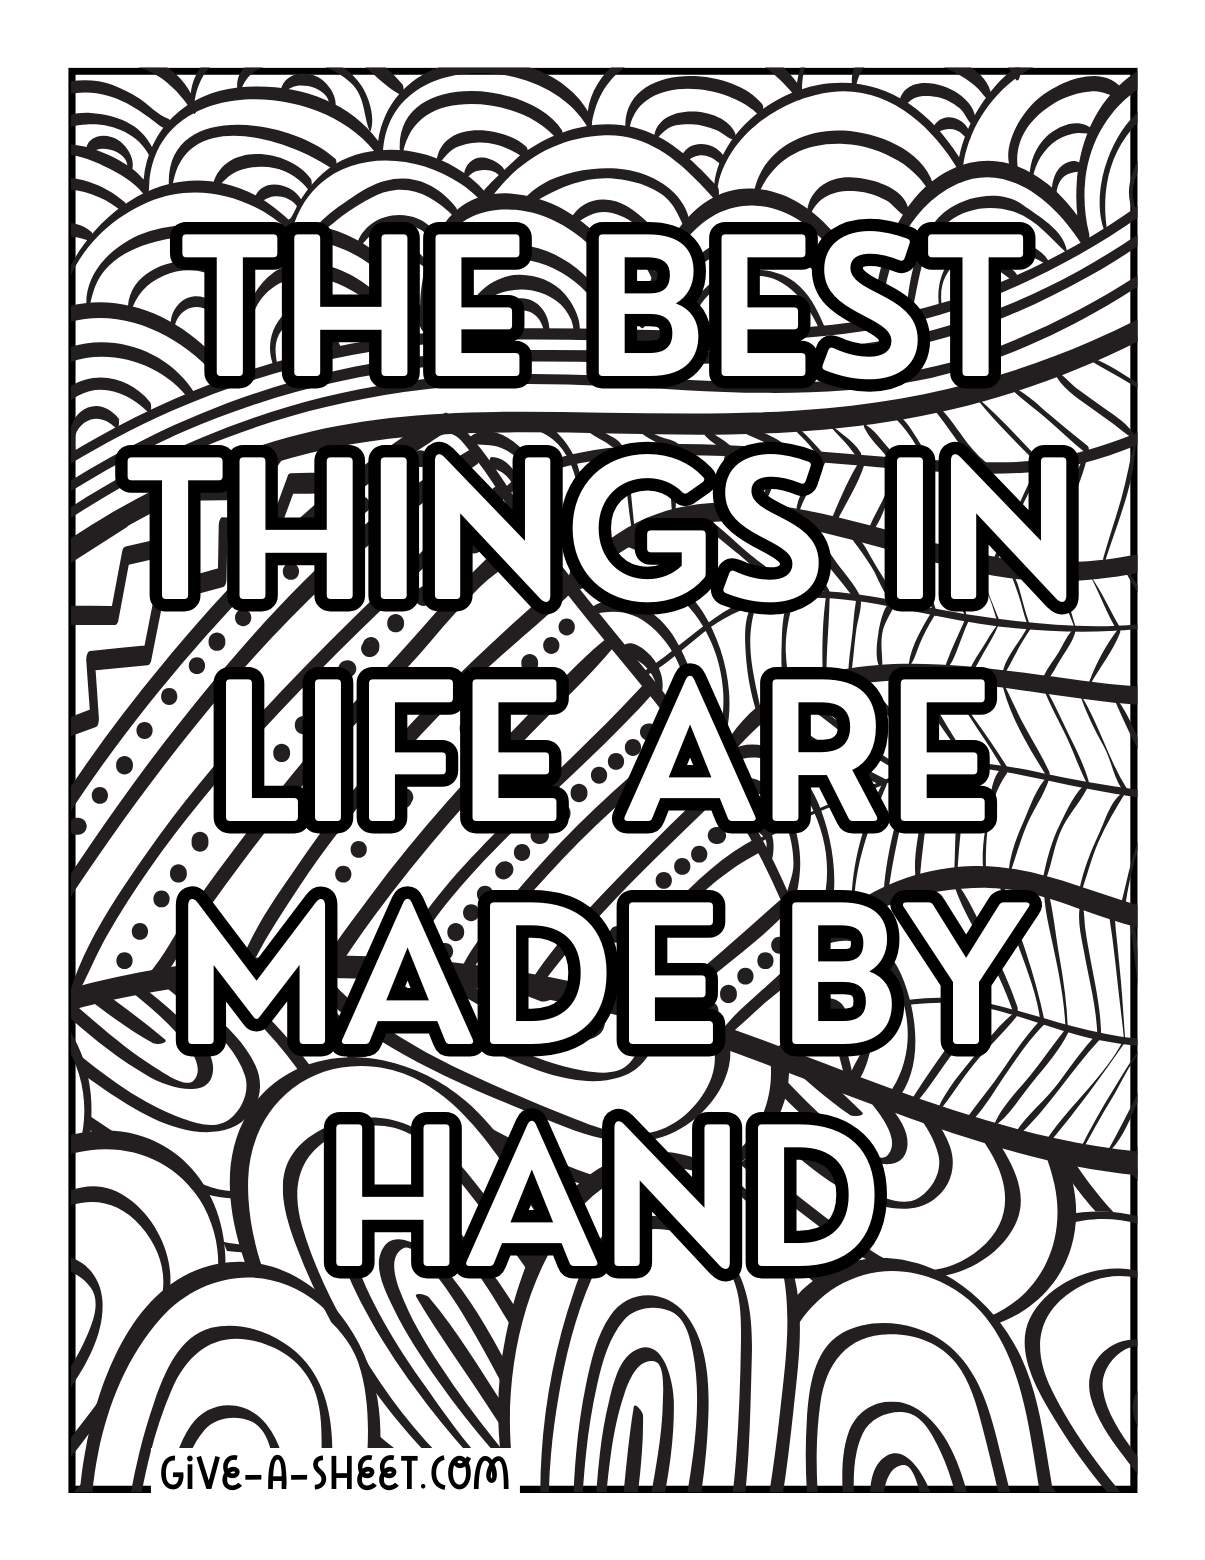 Handmade projects coloring page for adults.